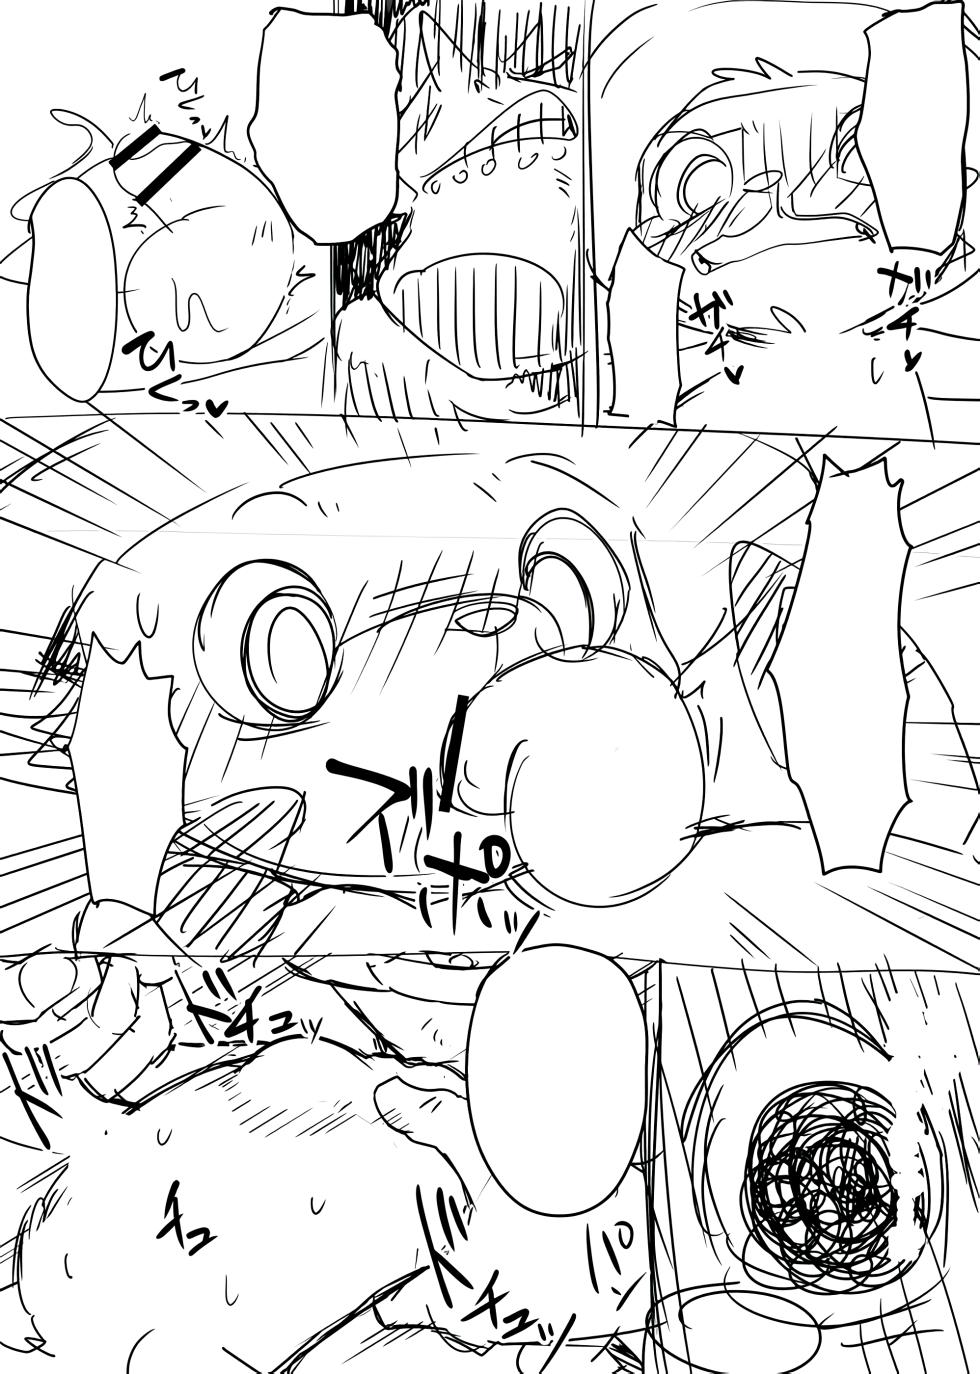 Manmosu Marimo - Chopper Rape and Impregnation + Extra (Text Cleaned) - Page 8